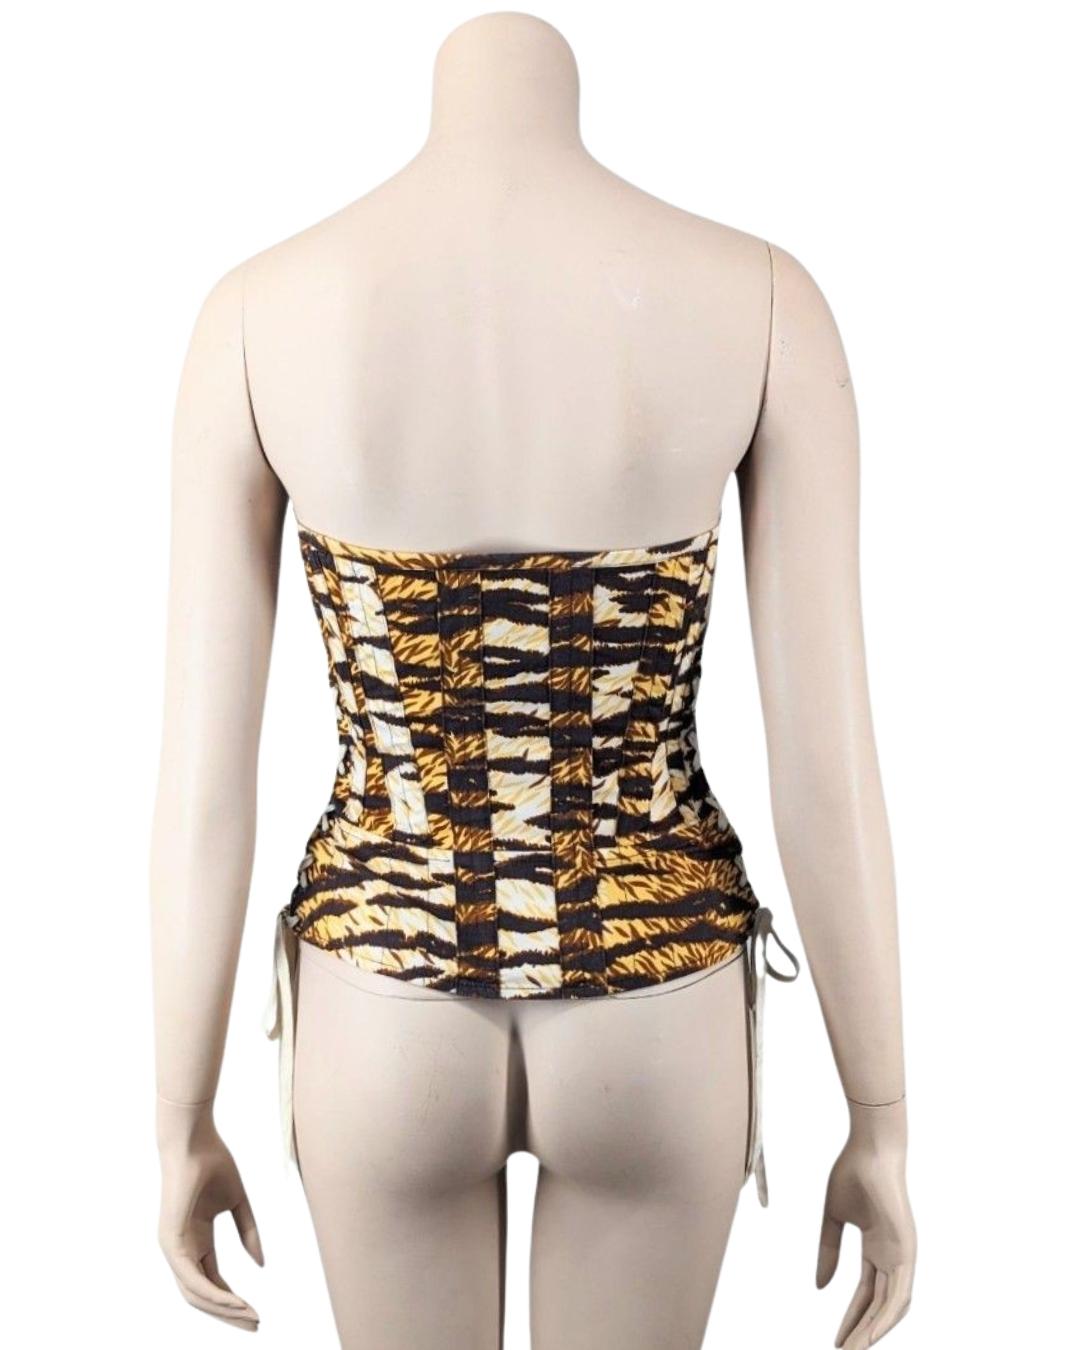 D&G by Dolce & Gabbana Animal Print Bustier For Sale 1